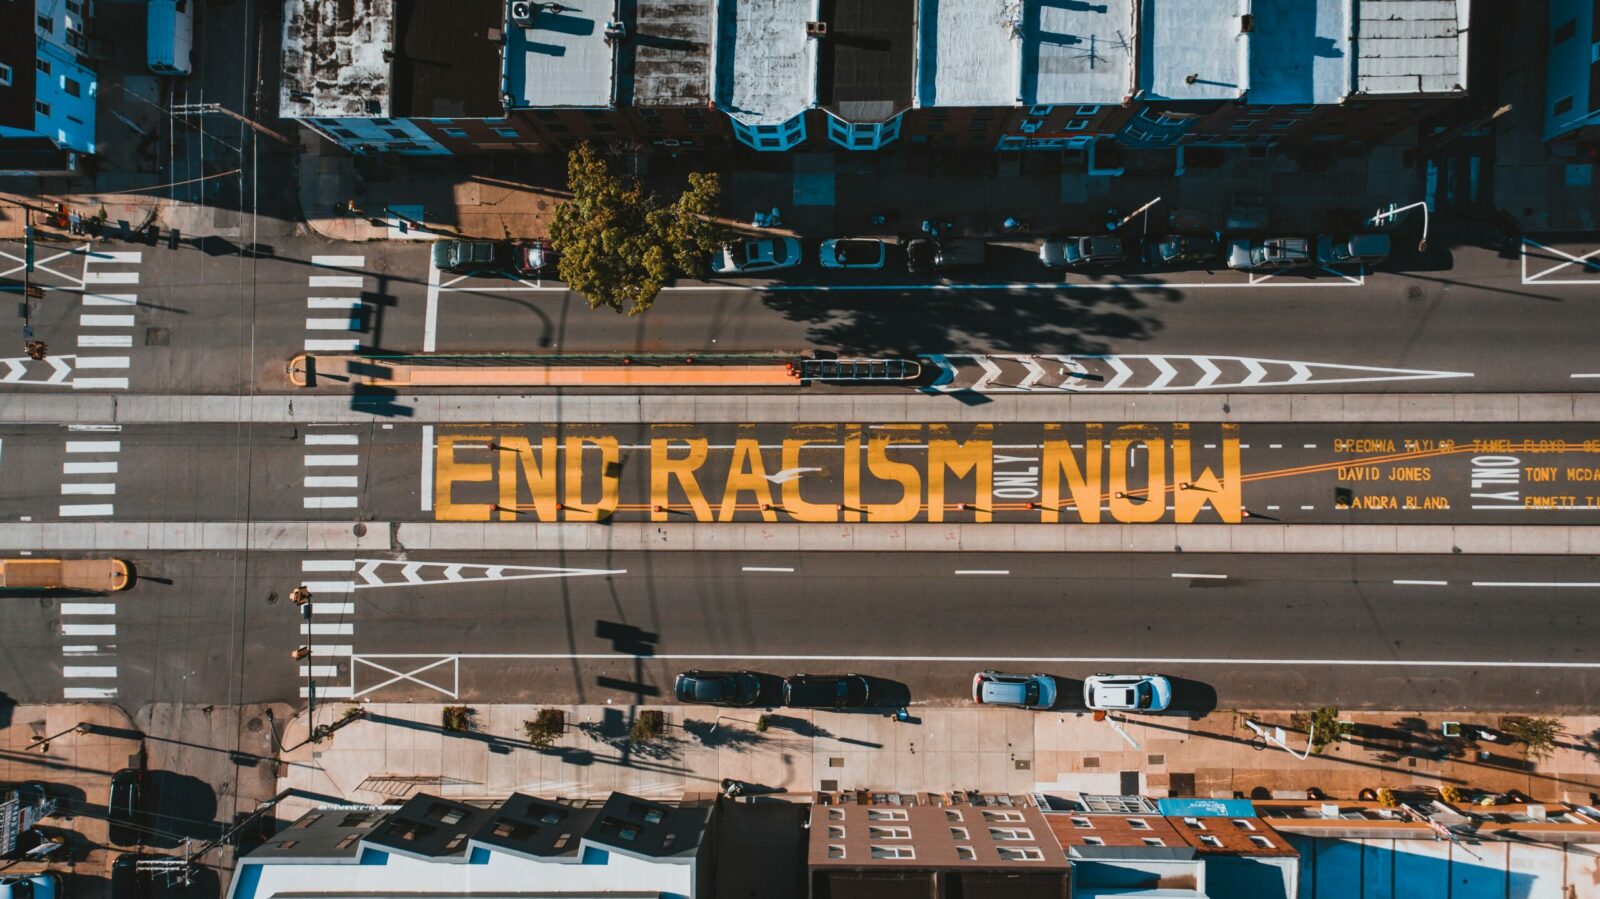 End Racism Now Mural